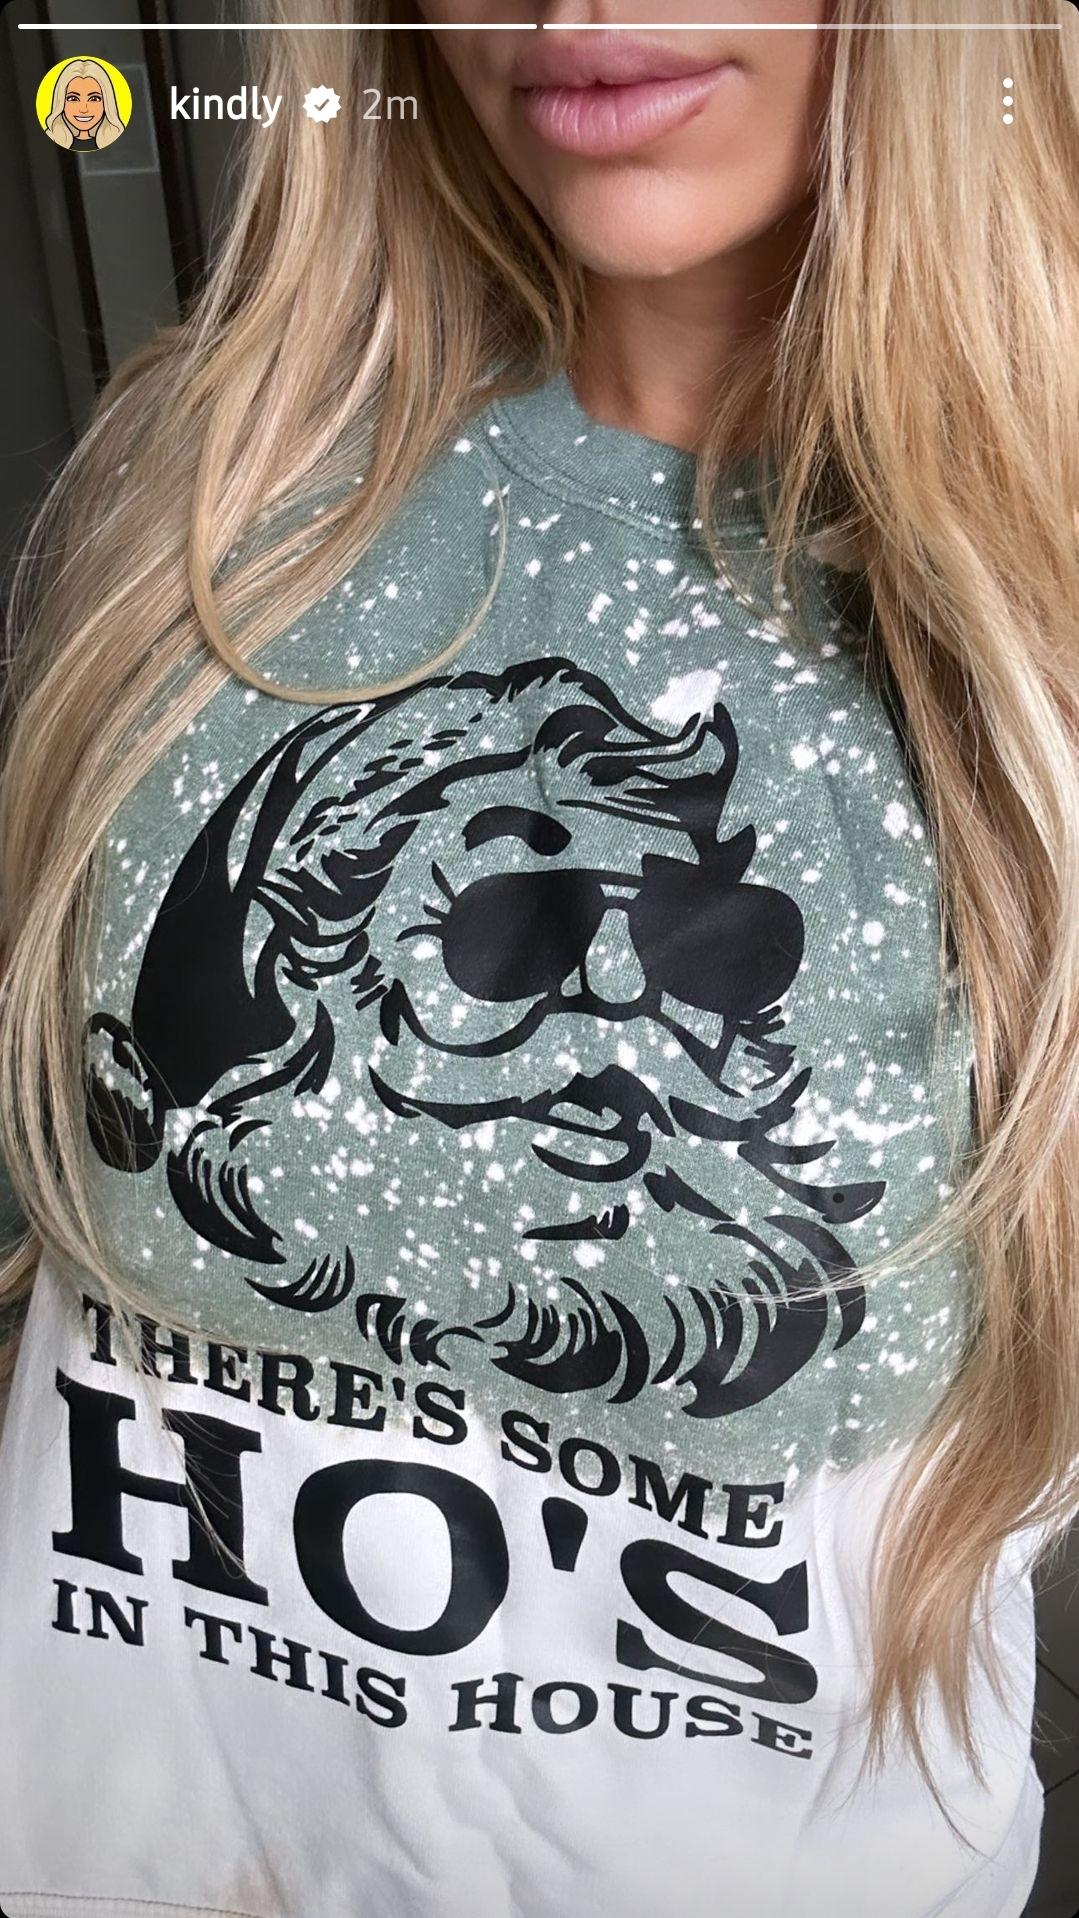 Kindly Myers in a funny Santa shirt on Christmas